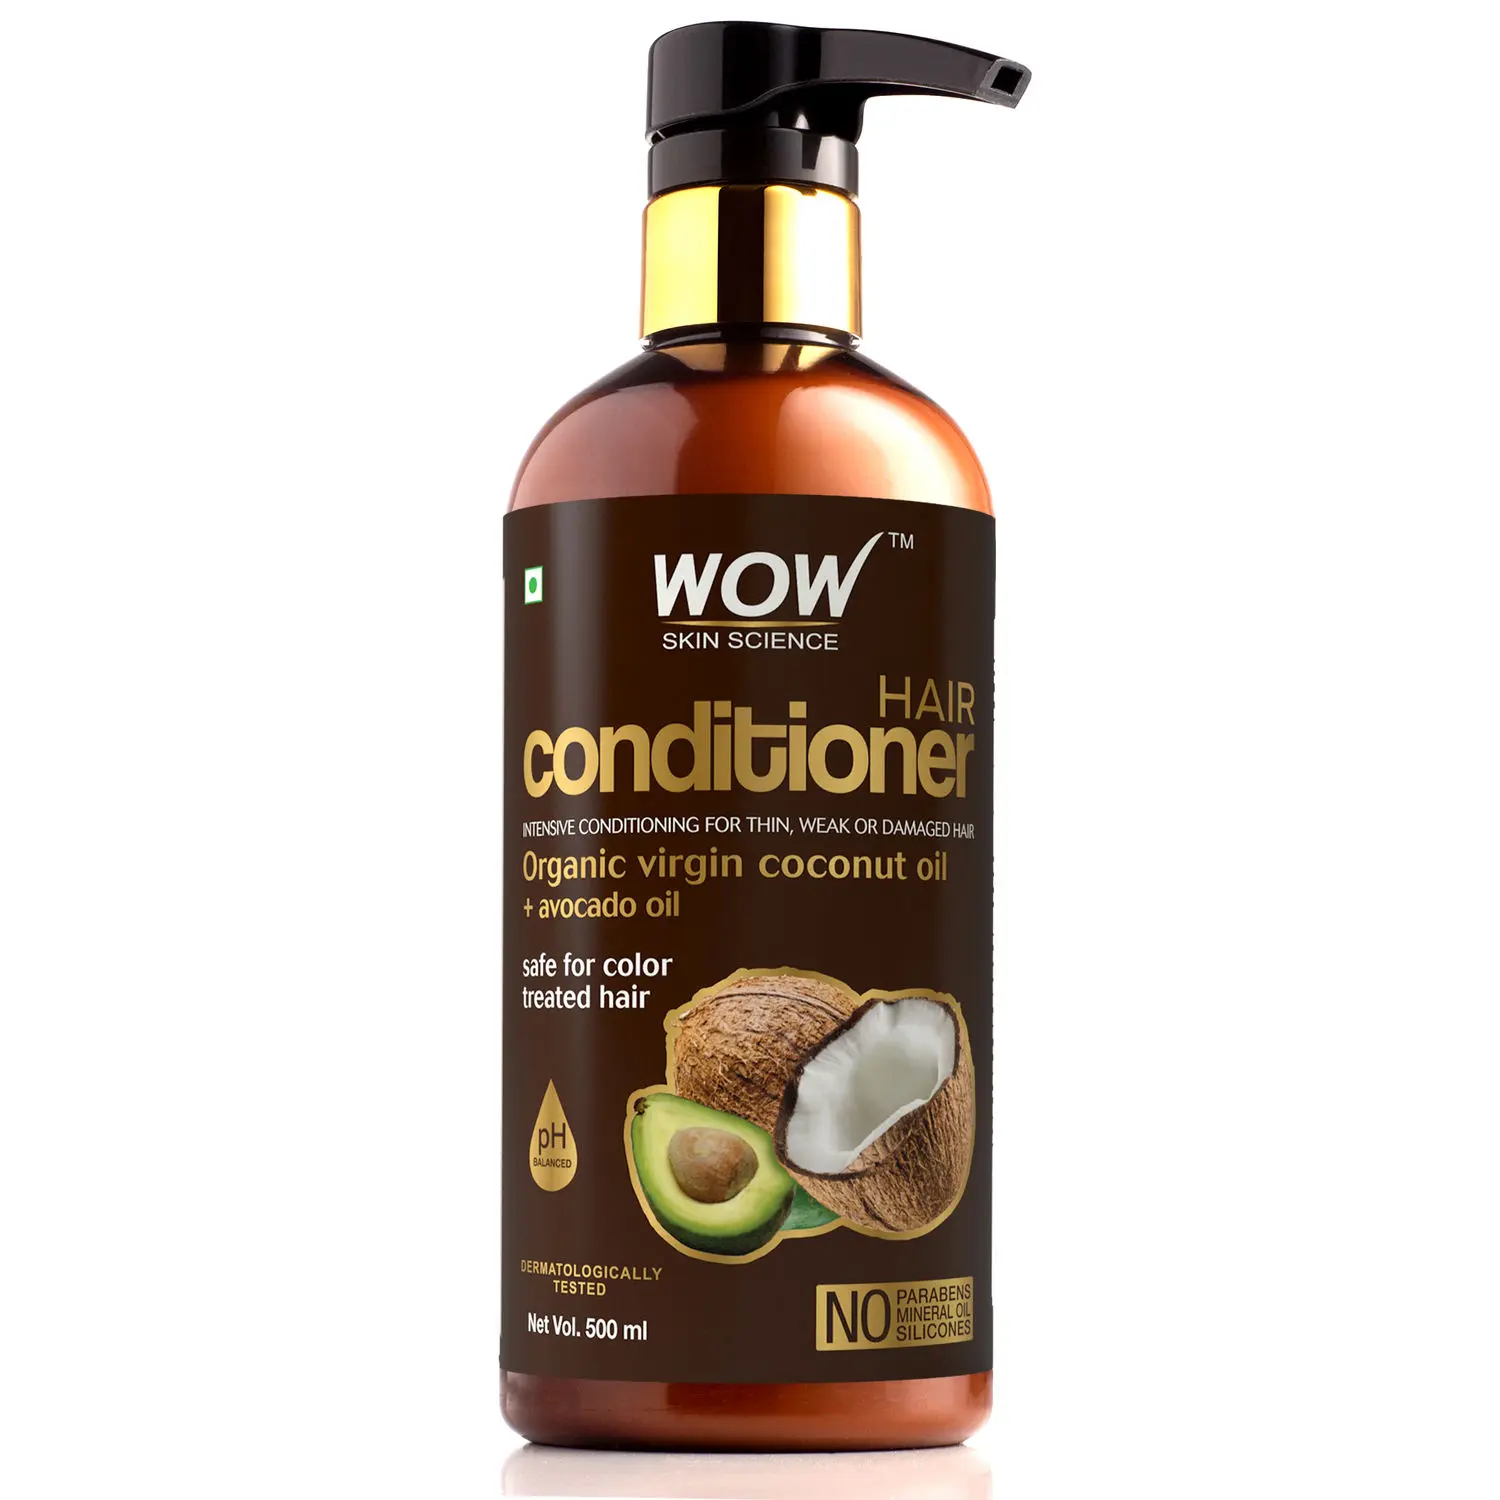 WOW Skin Science Hair Conditioner With Organic Virgin Coconut Oil + Avocado Oil (500 ml)